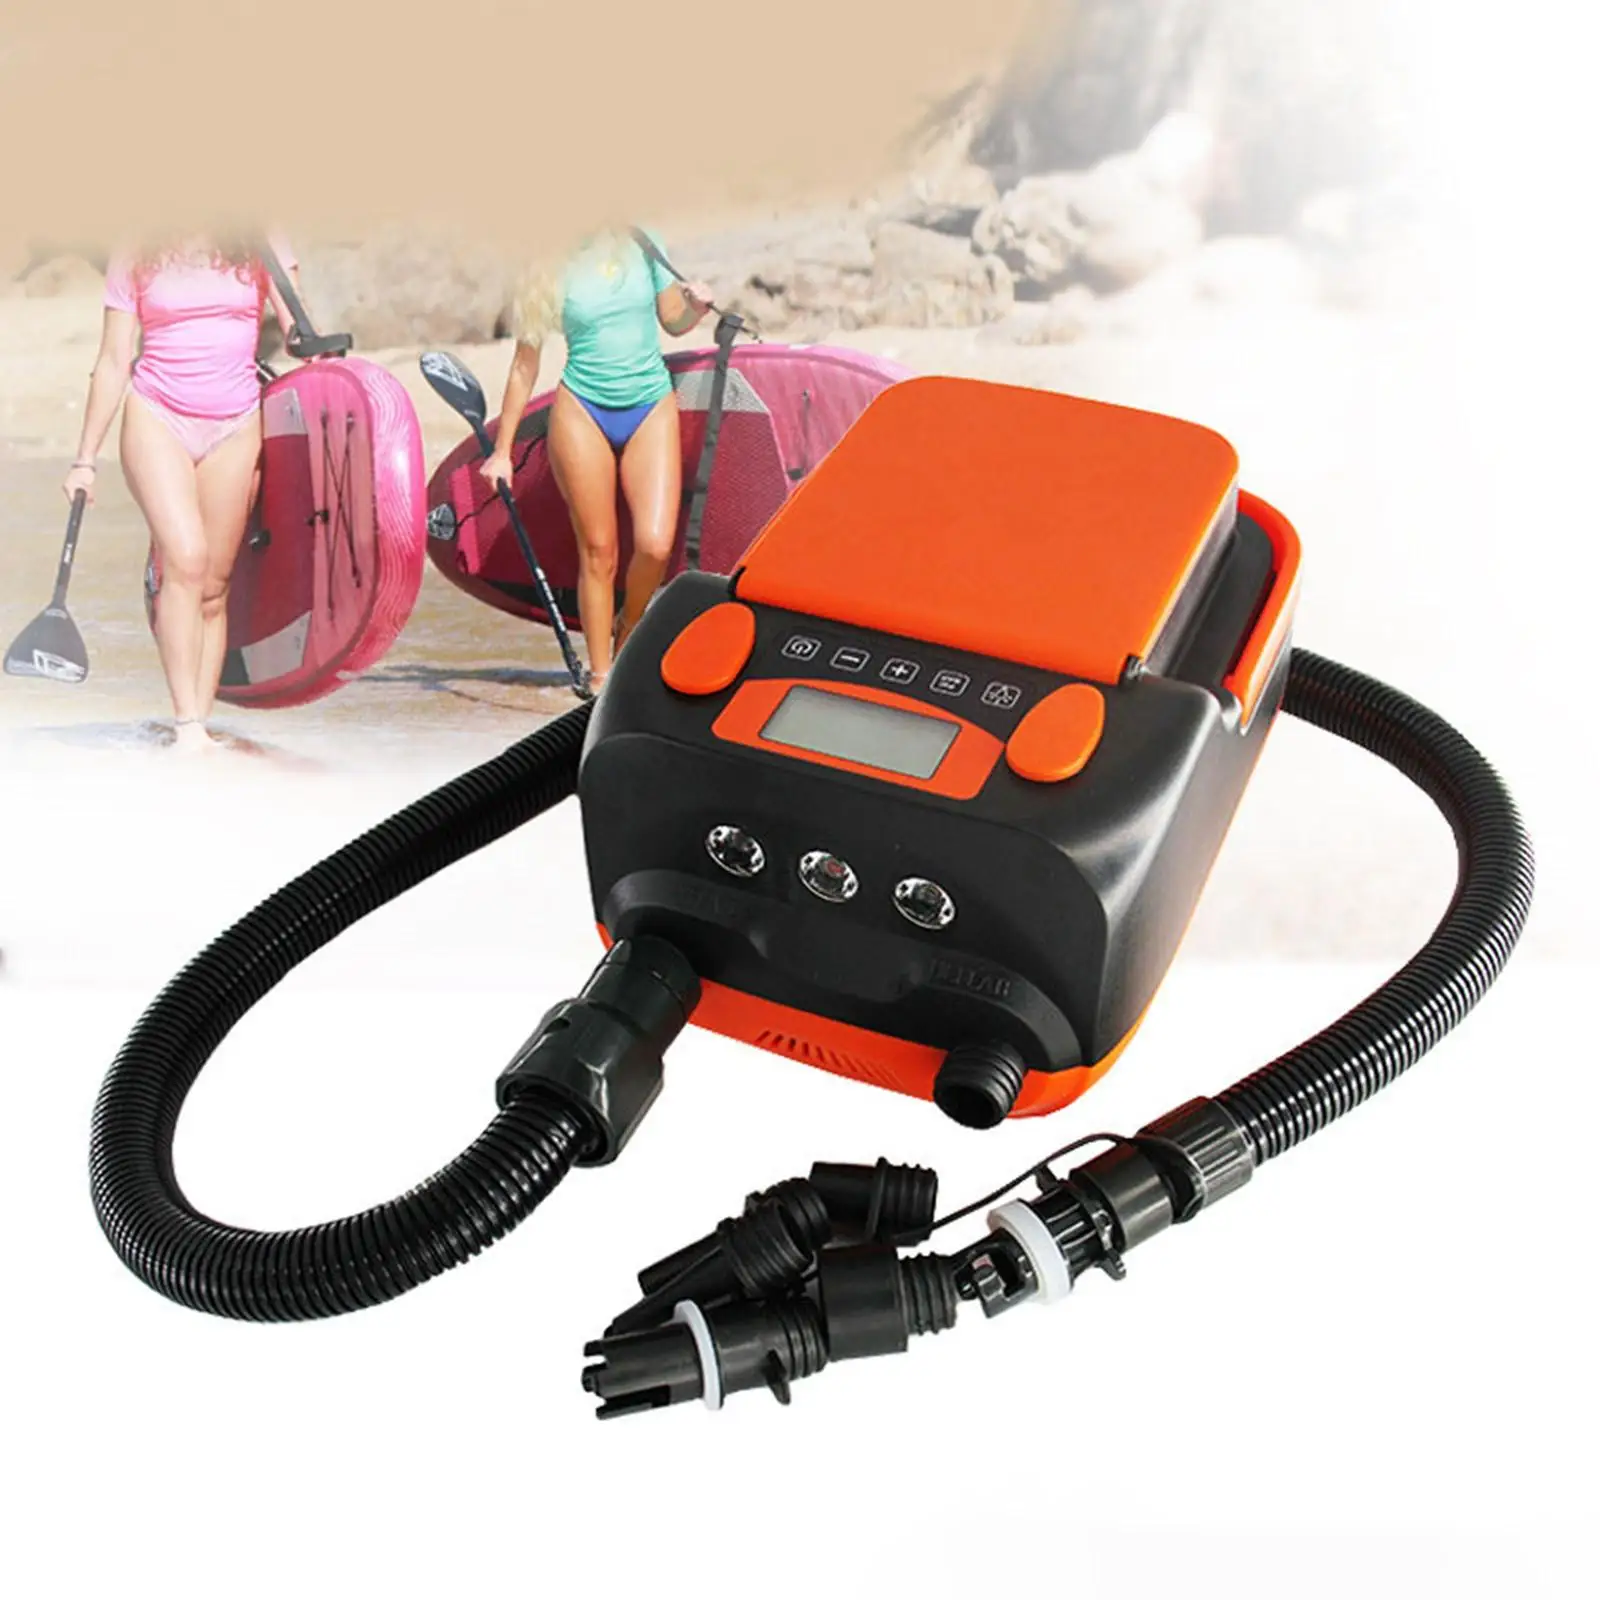 Electric Air Pump 16PSI Portable High Pressure Air Pump Auto-Off Electric Pump Inflator with 5 Nozzles for Inflatable Boat